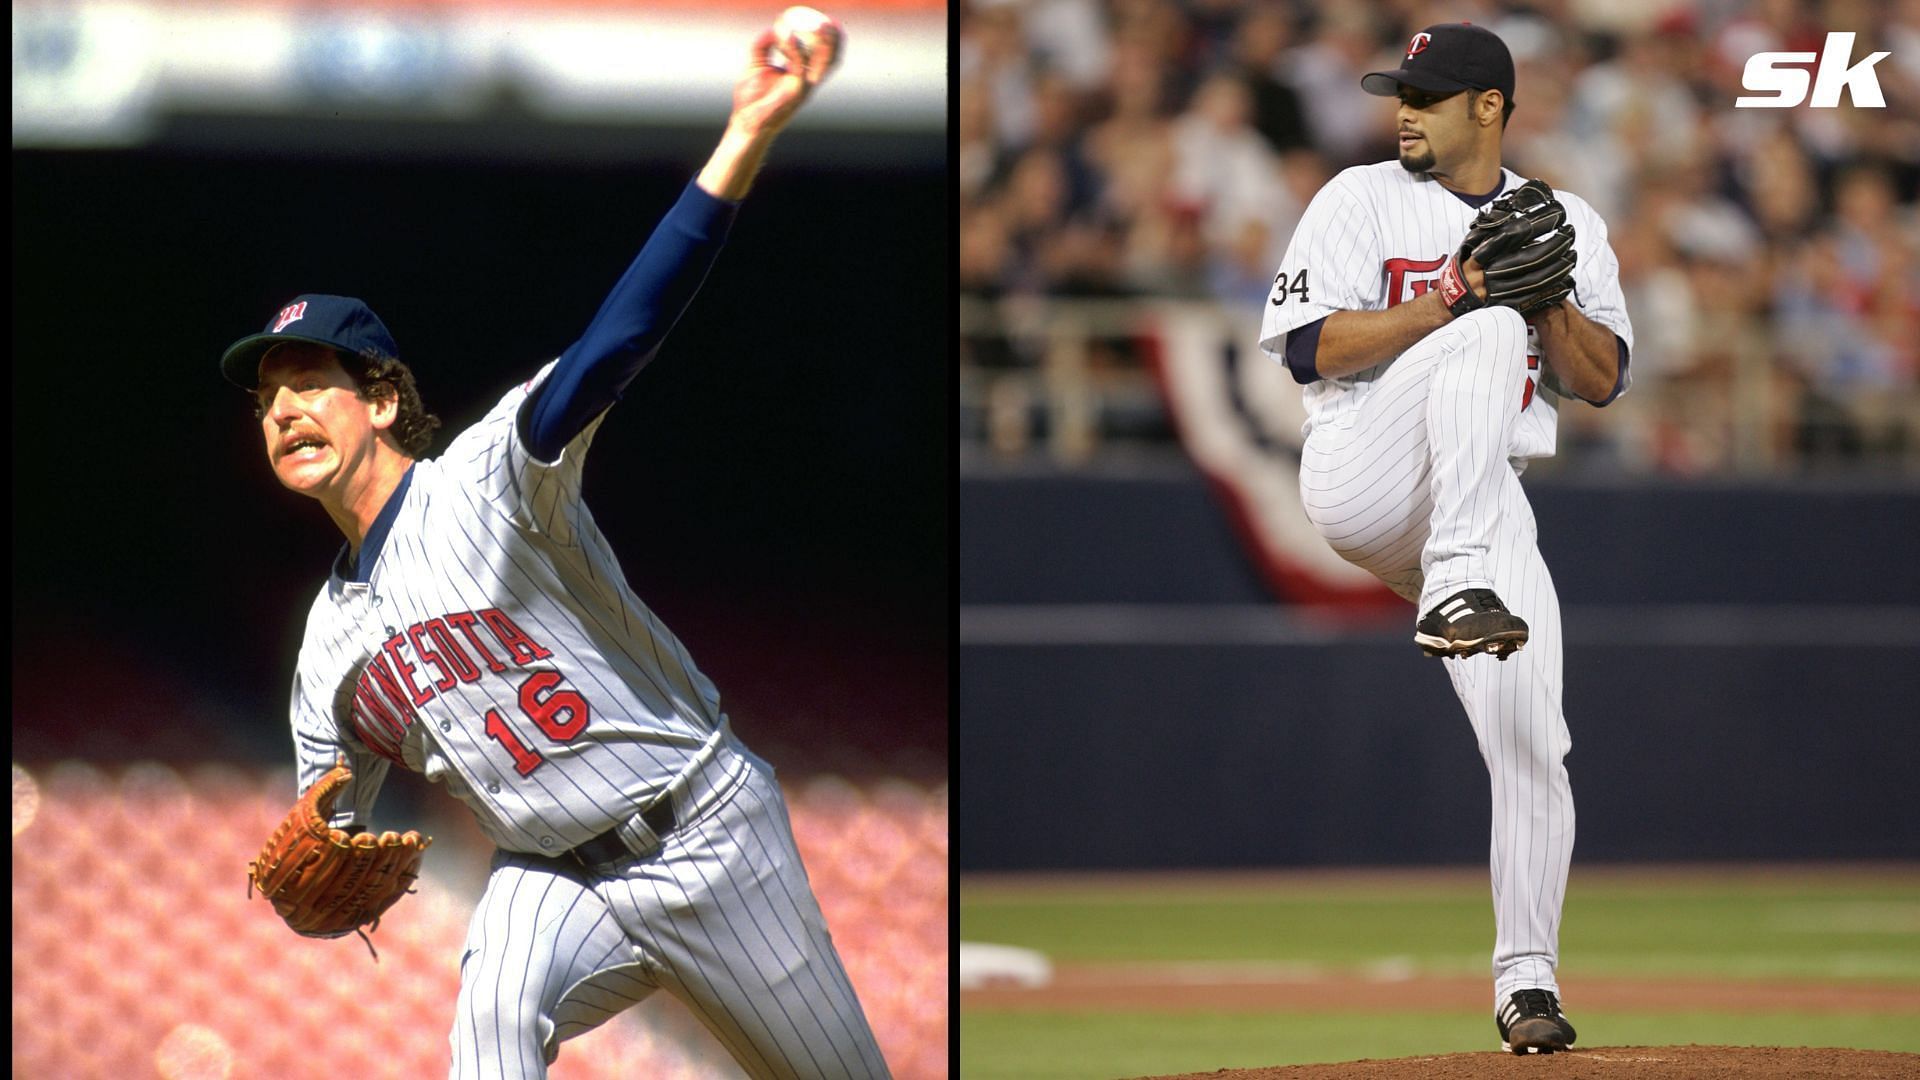 Which Twins pitchers have recorded 20+ wins in a season? MLB Immaculate Grid Answers September 18